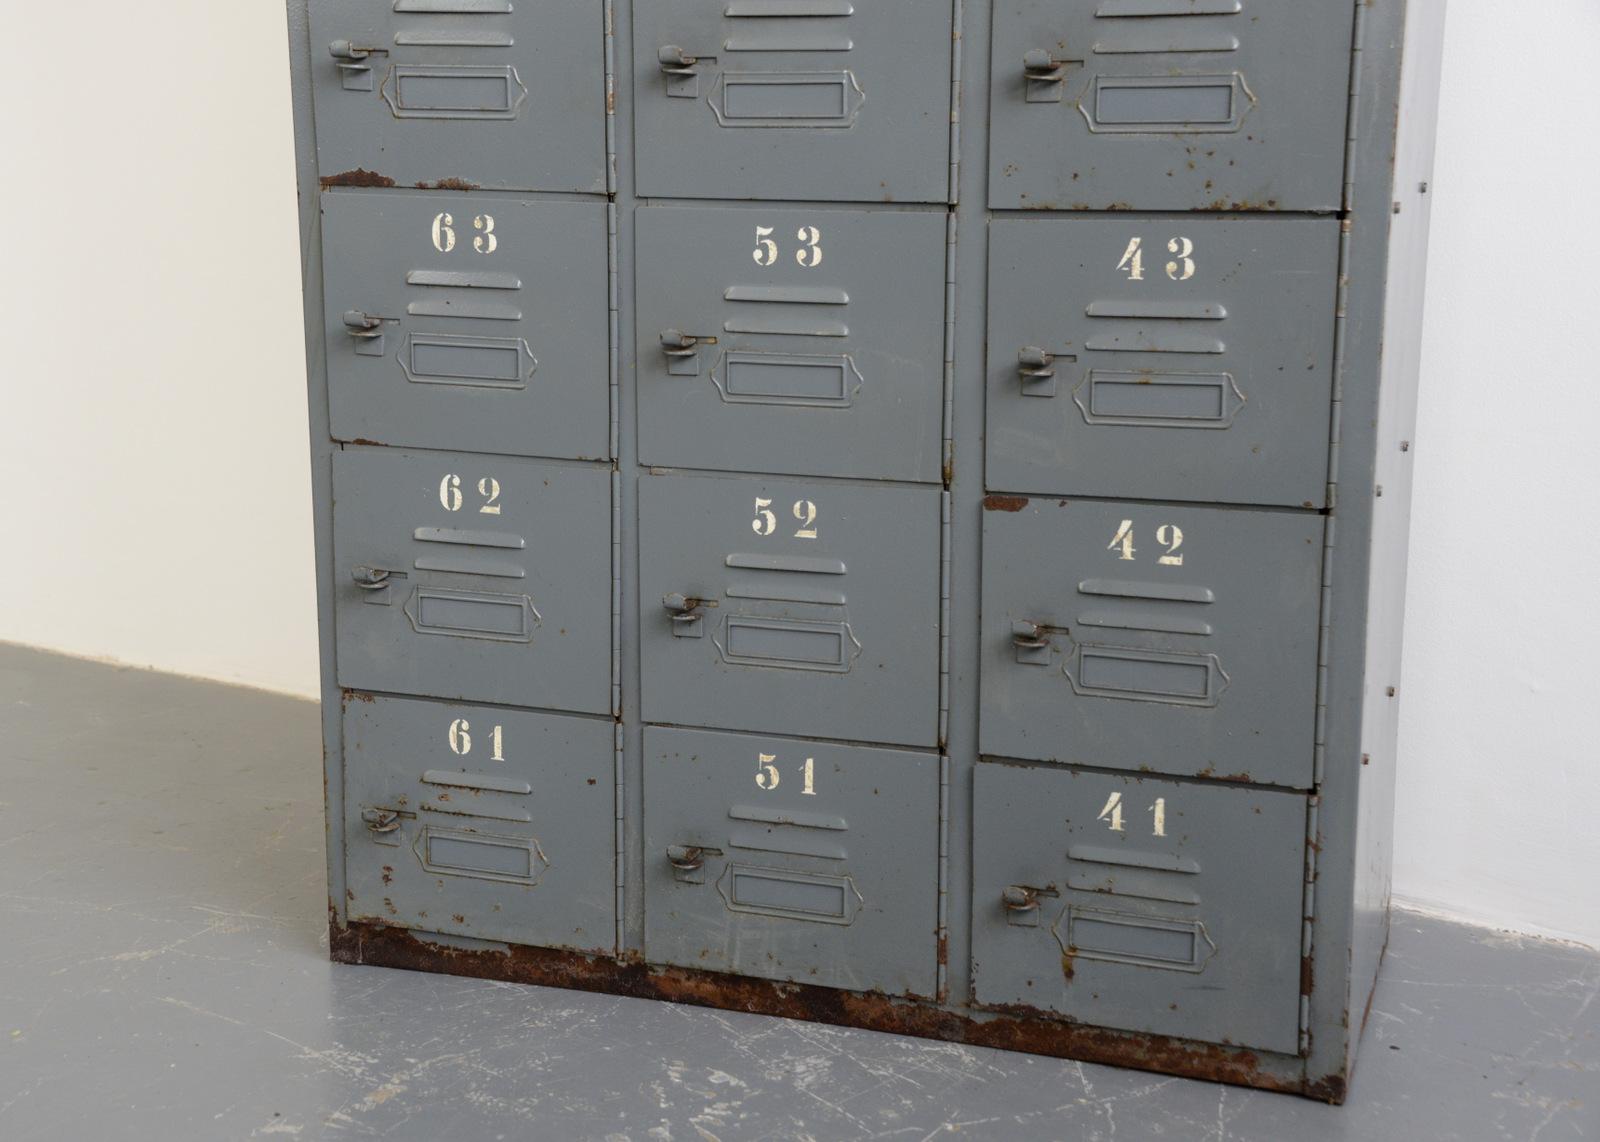 Industrial pigeon hole lockers, circa 1940s

- Made from steel with vented doors
- Cleaned and clear lacquered inside and out
- Original stenciled numbers
- German, 1940s
- Measures: 220cm tall x 40cm deep x 88cm wide

Condition